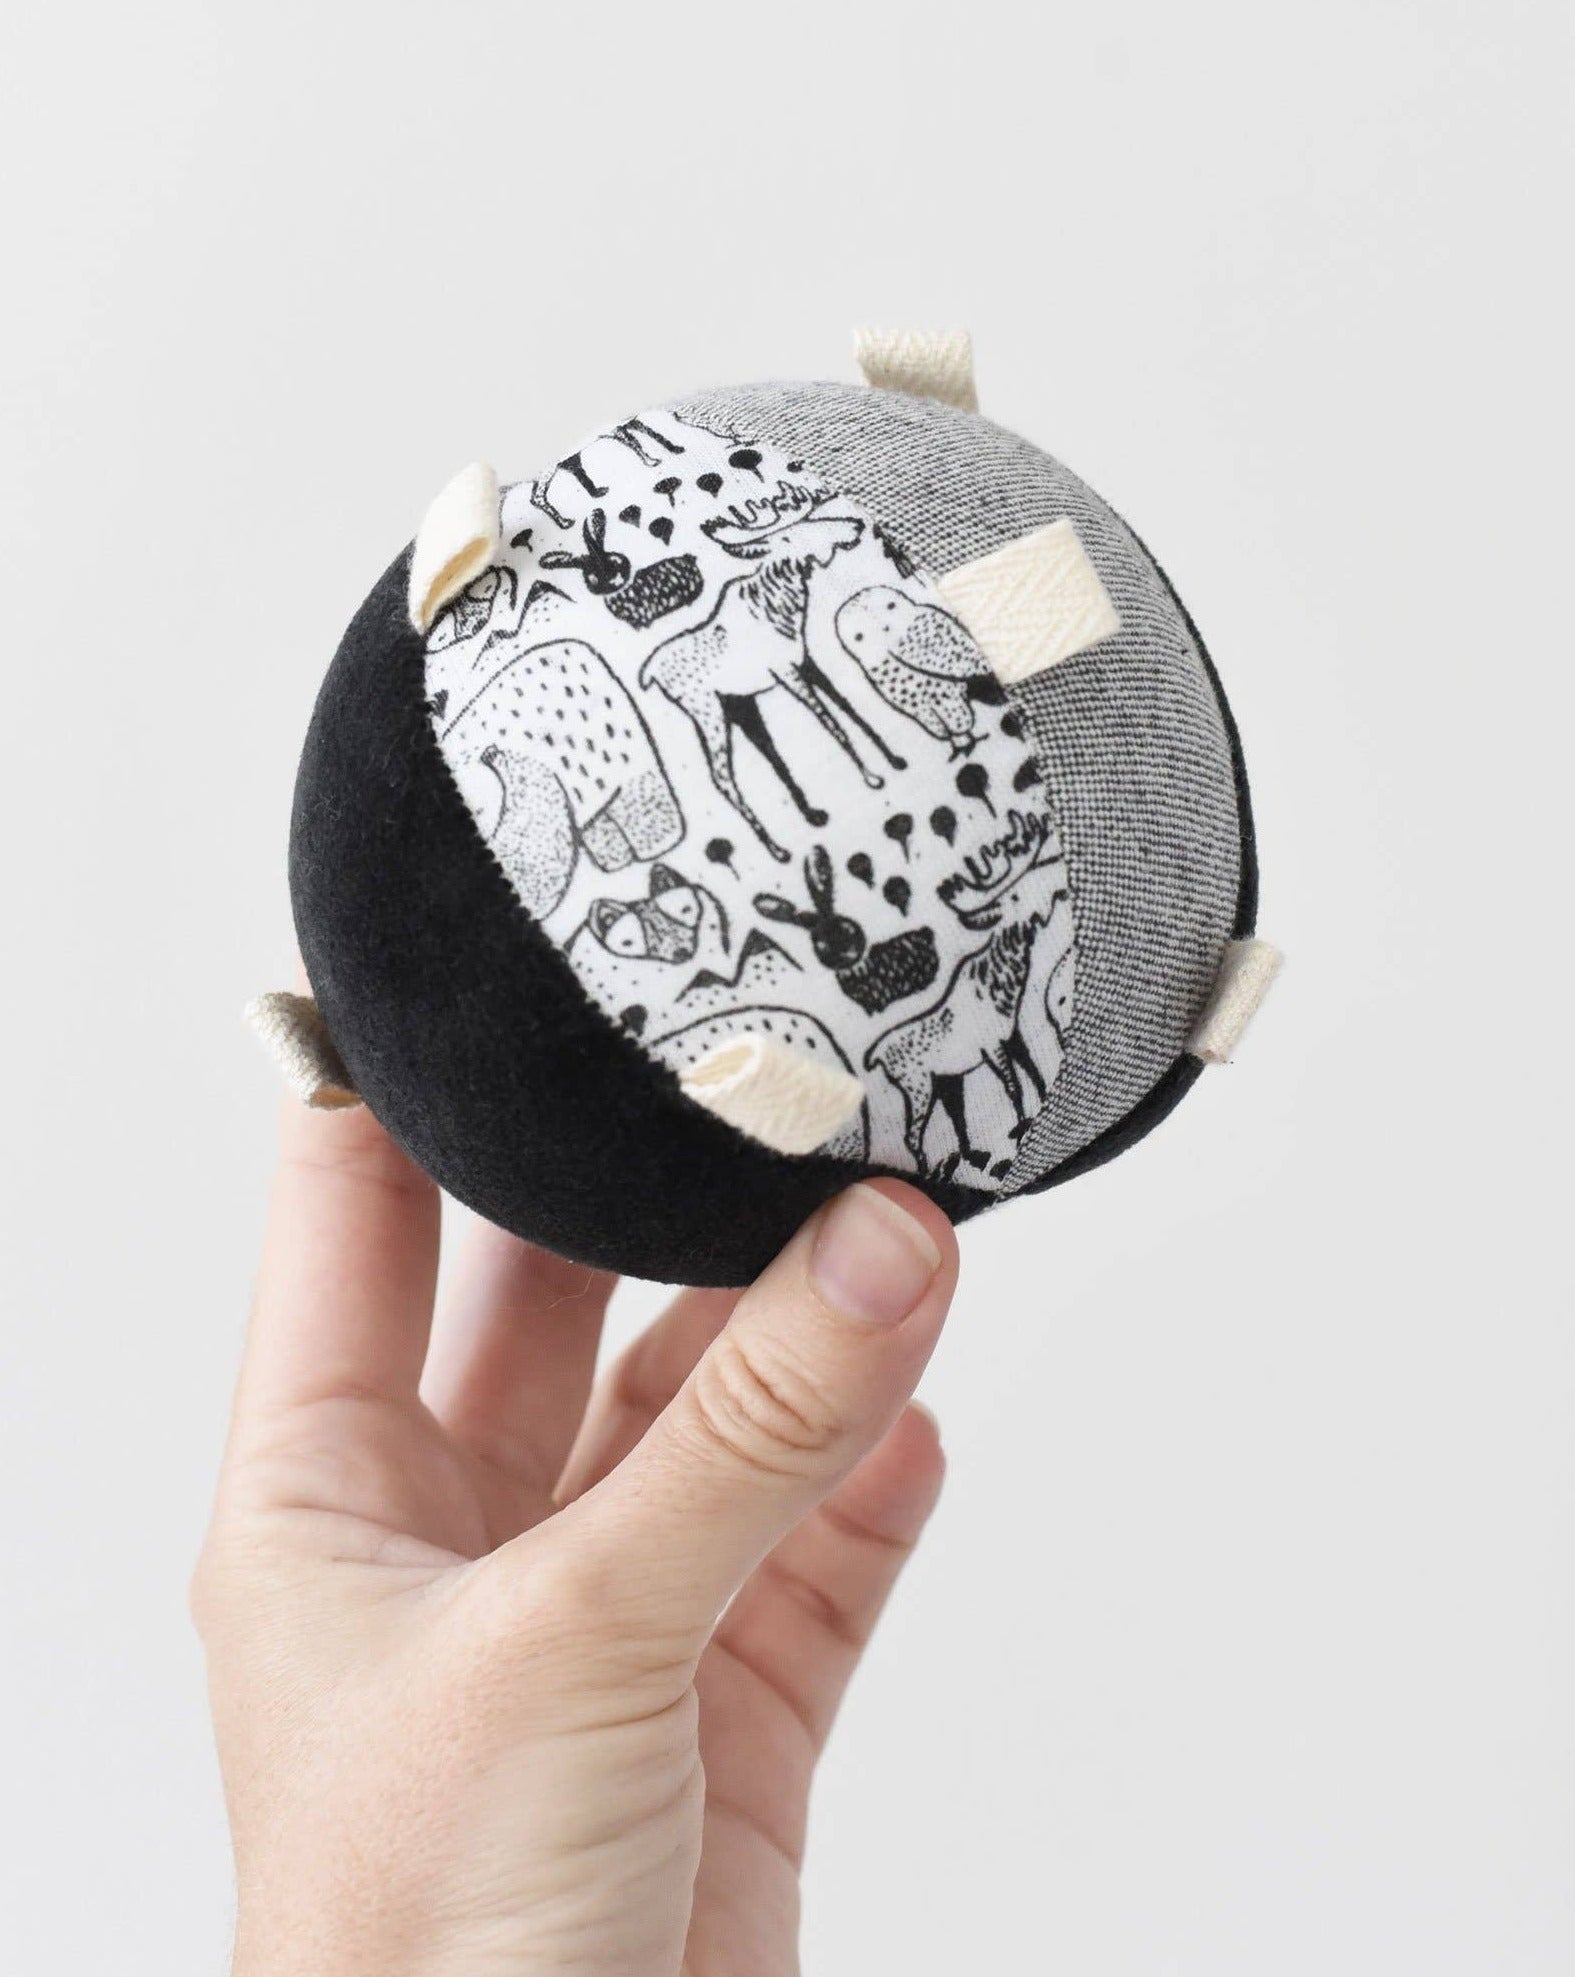 Taggy Ball with Rattle